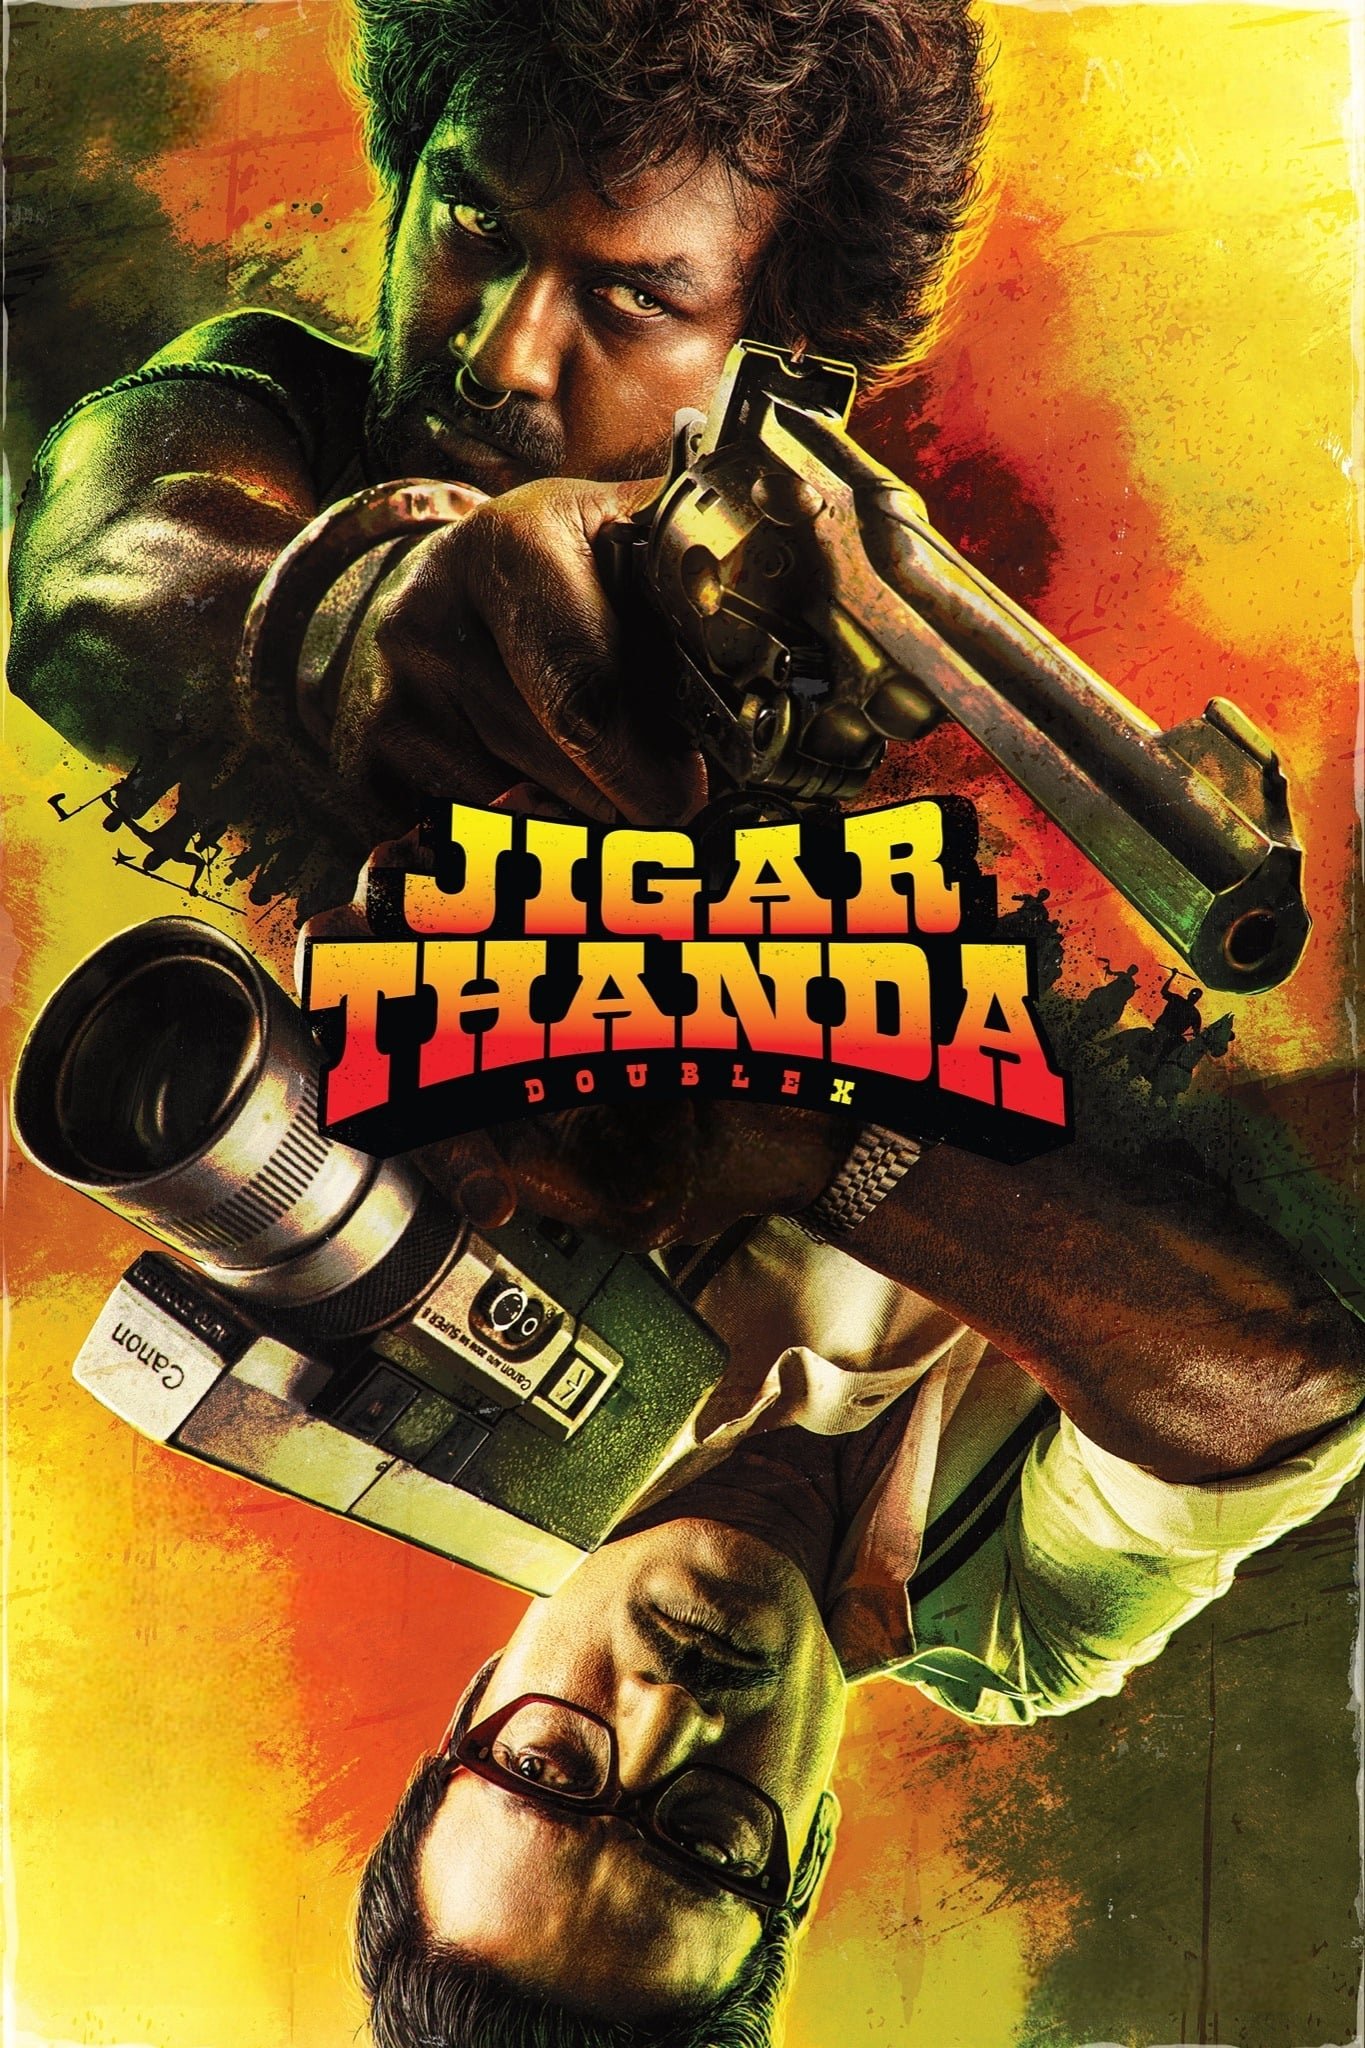 Poster for the movie "Jigarthanda DoubleX"